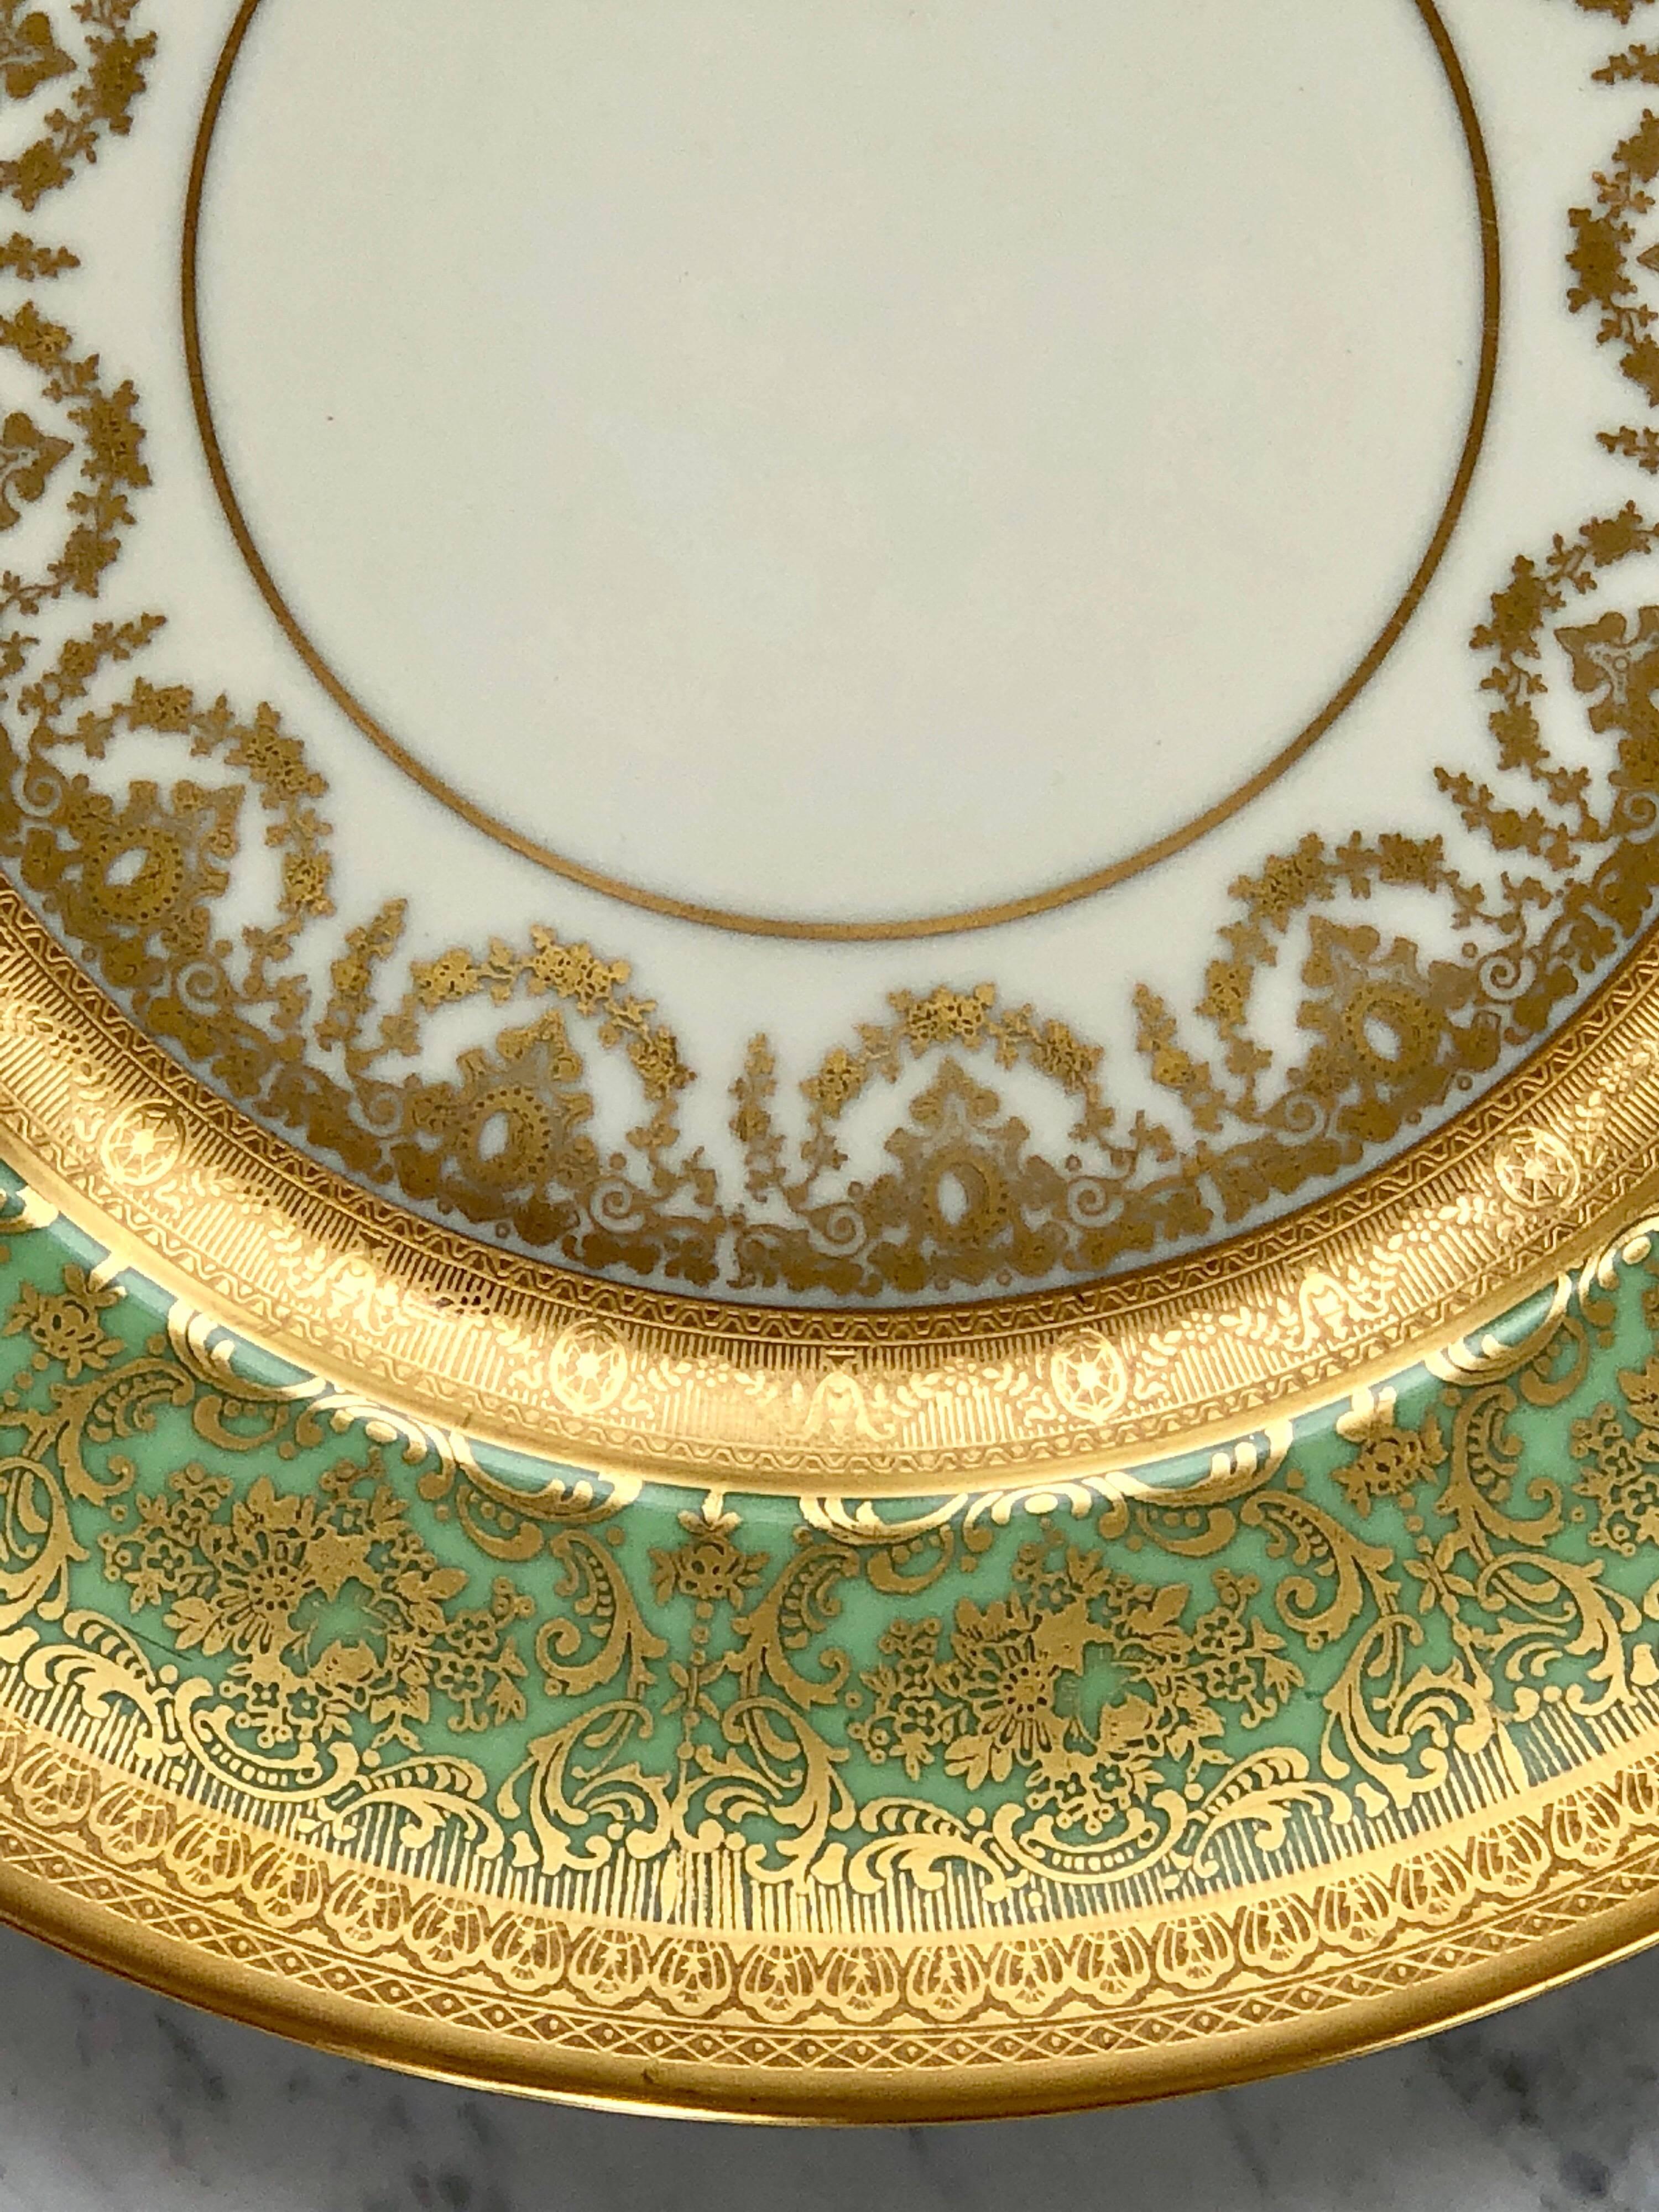 An exquisite set of 12 dinner plates by Heinrich Selb &Co. The very ornate 24-karat gold decoration of flower garland's and the intricate foliate designs on a light green and ivory background make them perfect choice for festive occasions.
Made in